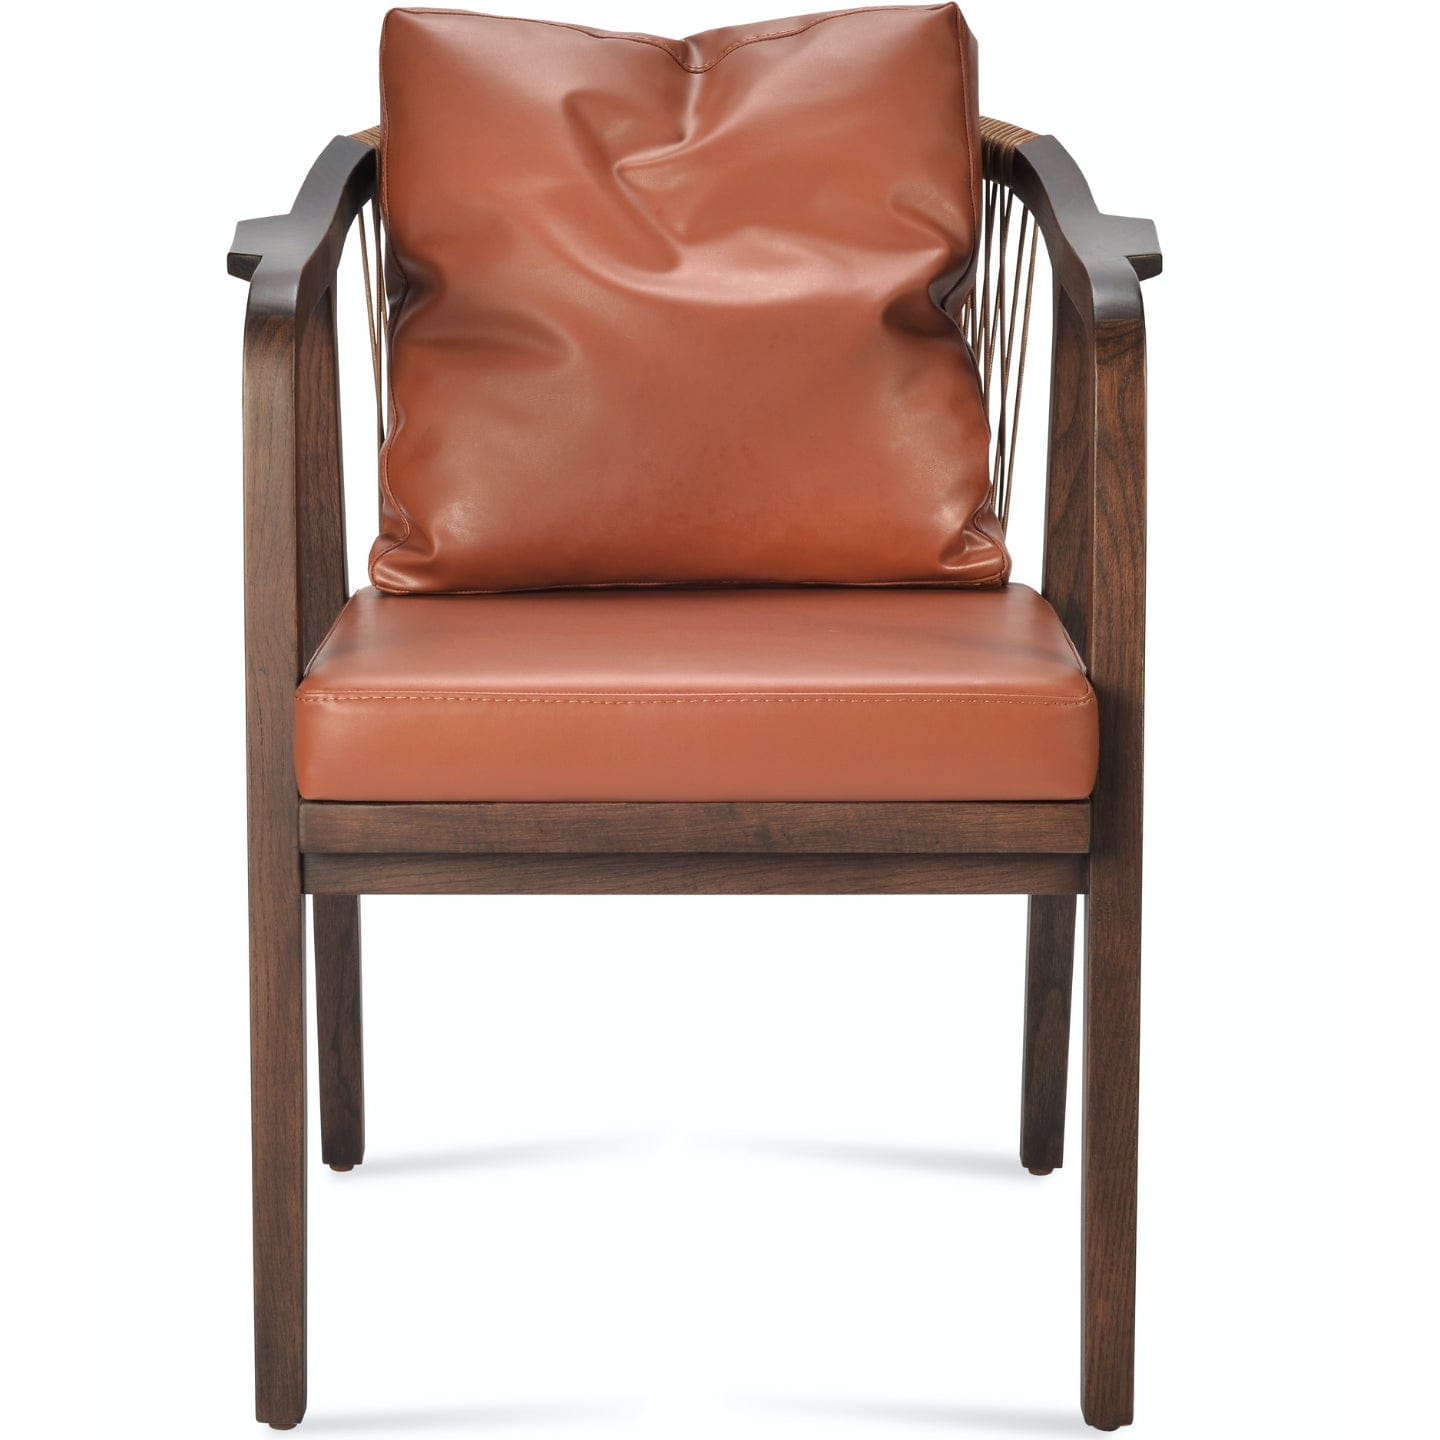 Soho Concept drops-armchair-wood-base-faux-leather-seat-dining-chair-in-cinnamon